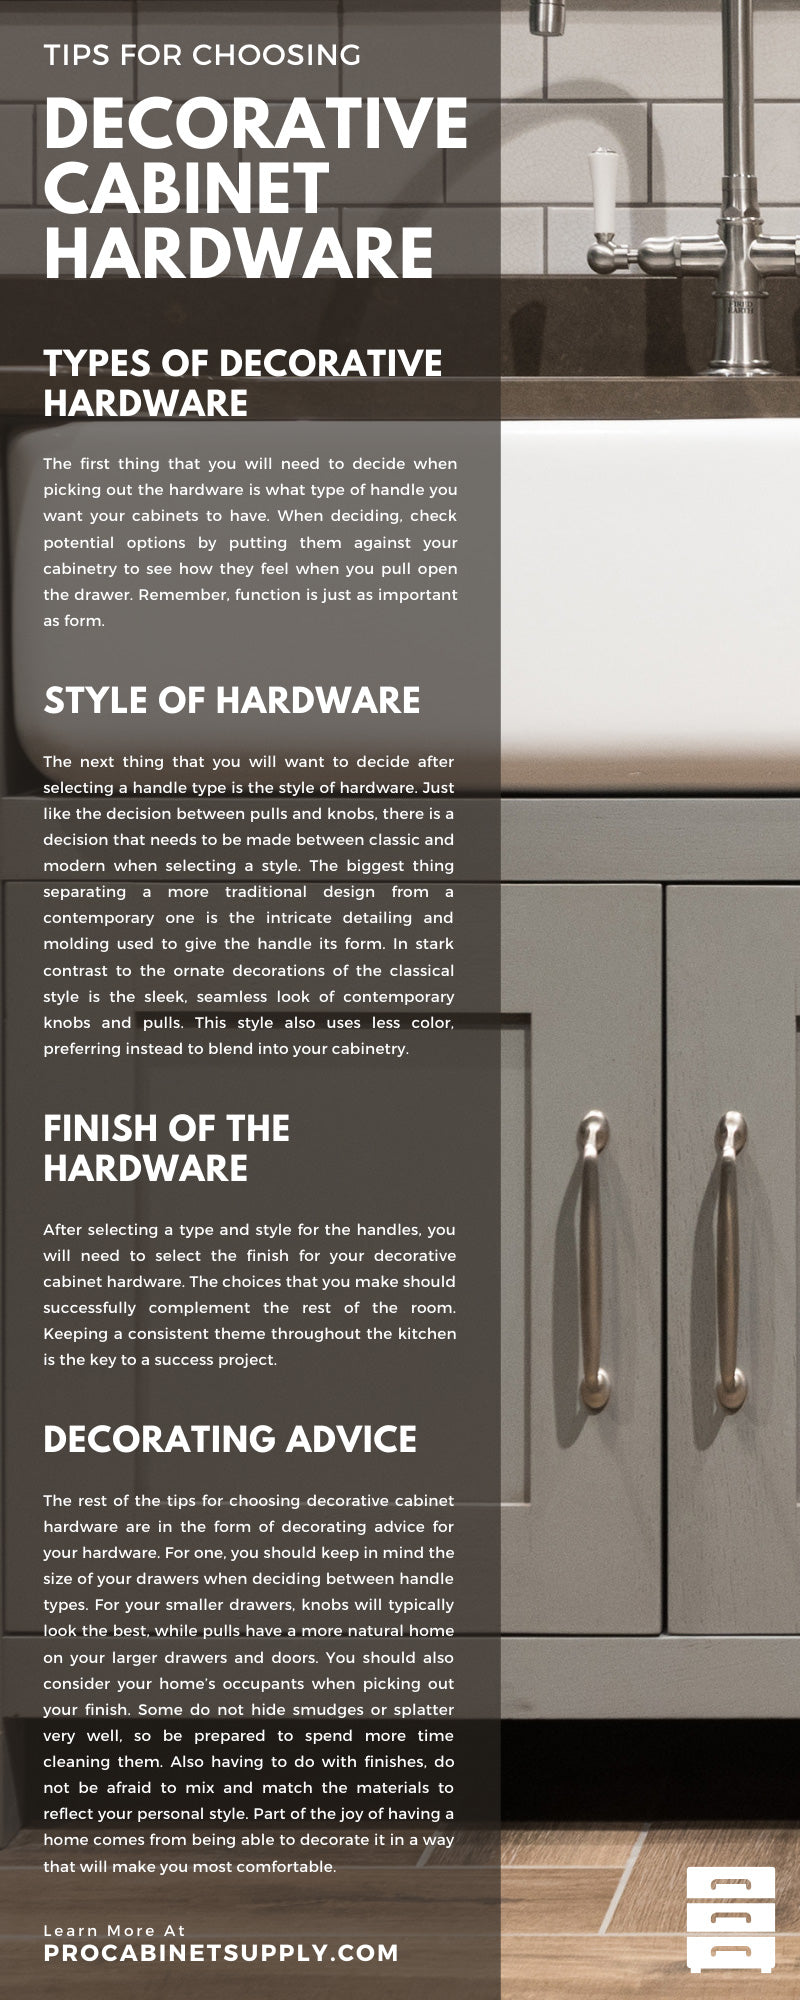 Tips for Choosing Decorative Cabinet Hardware